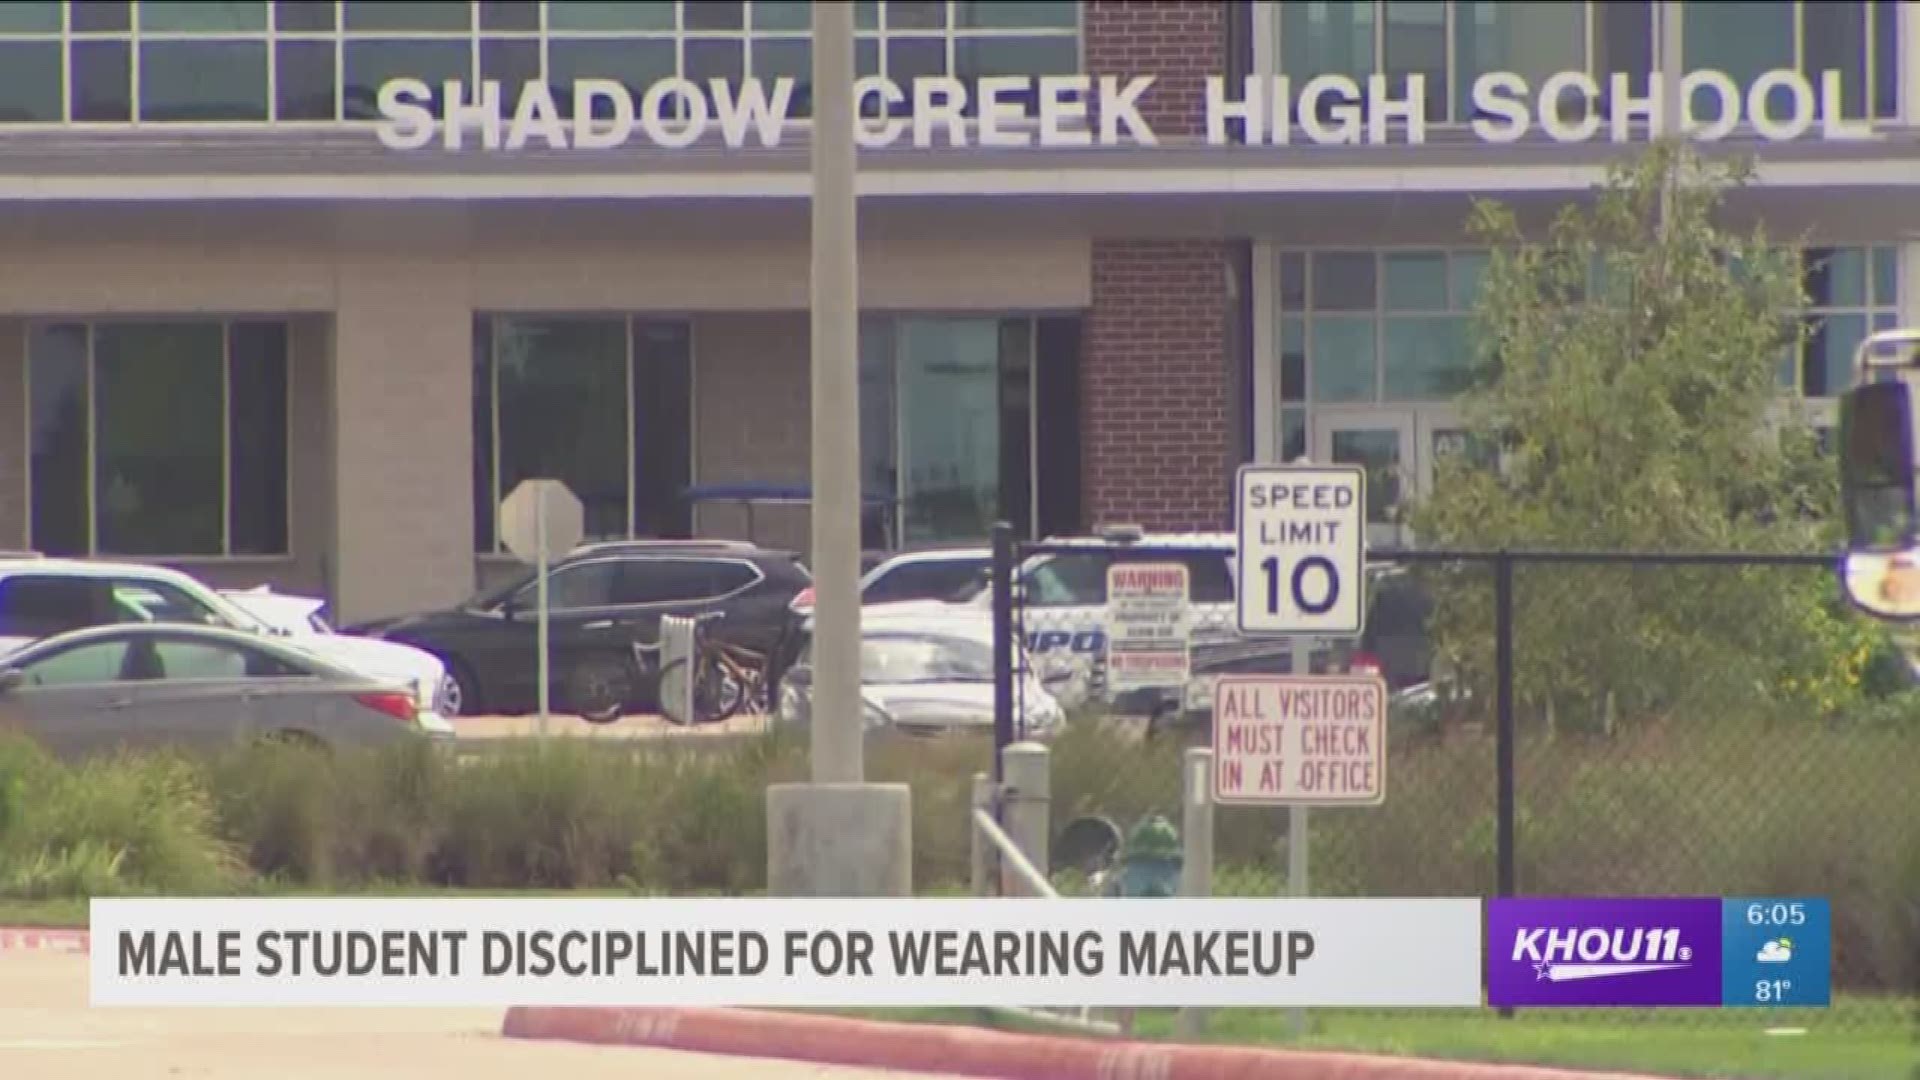 Alvin ISD is looking at changing its dress code. This comes after a male student was disciplined for wearing makeup to school.